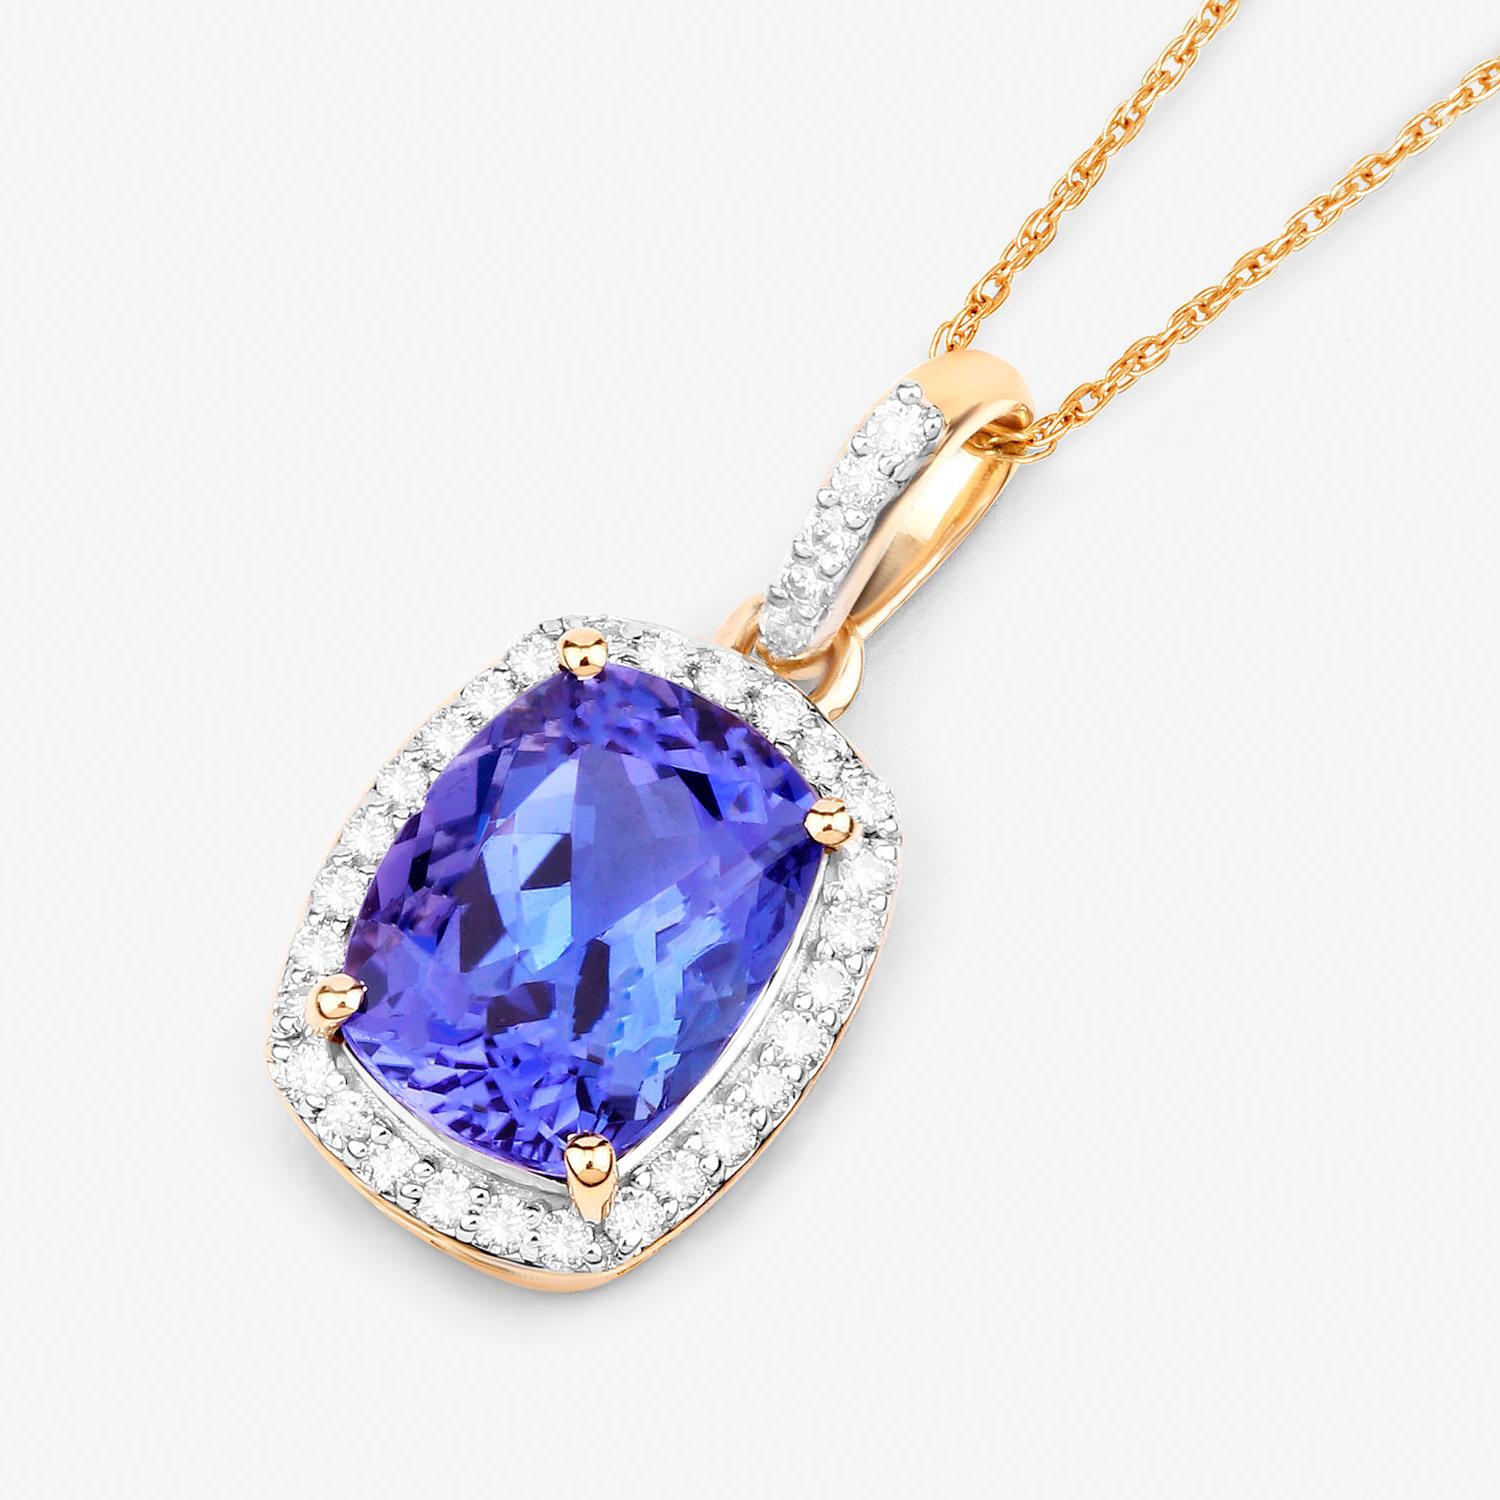 It comes with the Gemological Appraisal by GIA GG/AJP
All Gemstones are Natural
Tanzanite = 2.34 Carat
33 Diamonds = 0.15 Carats
Metal: 14K Yellow Gold
Pendant Dimensions: 19 x 9 mm